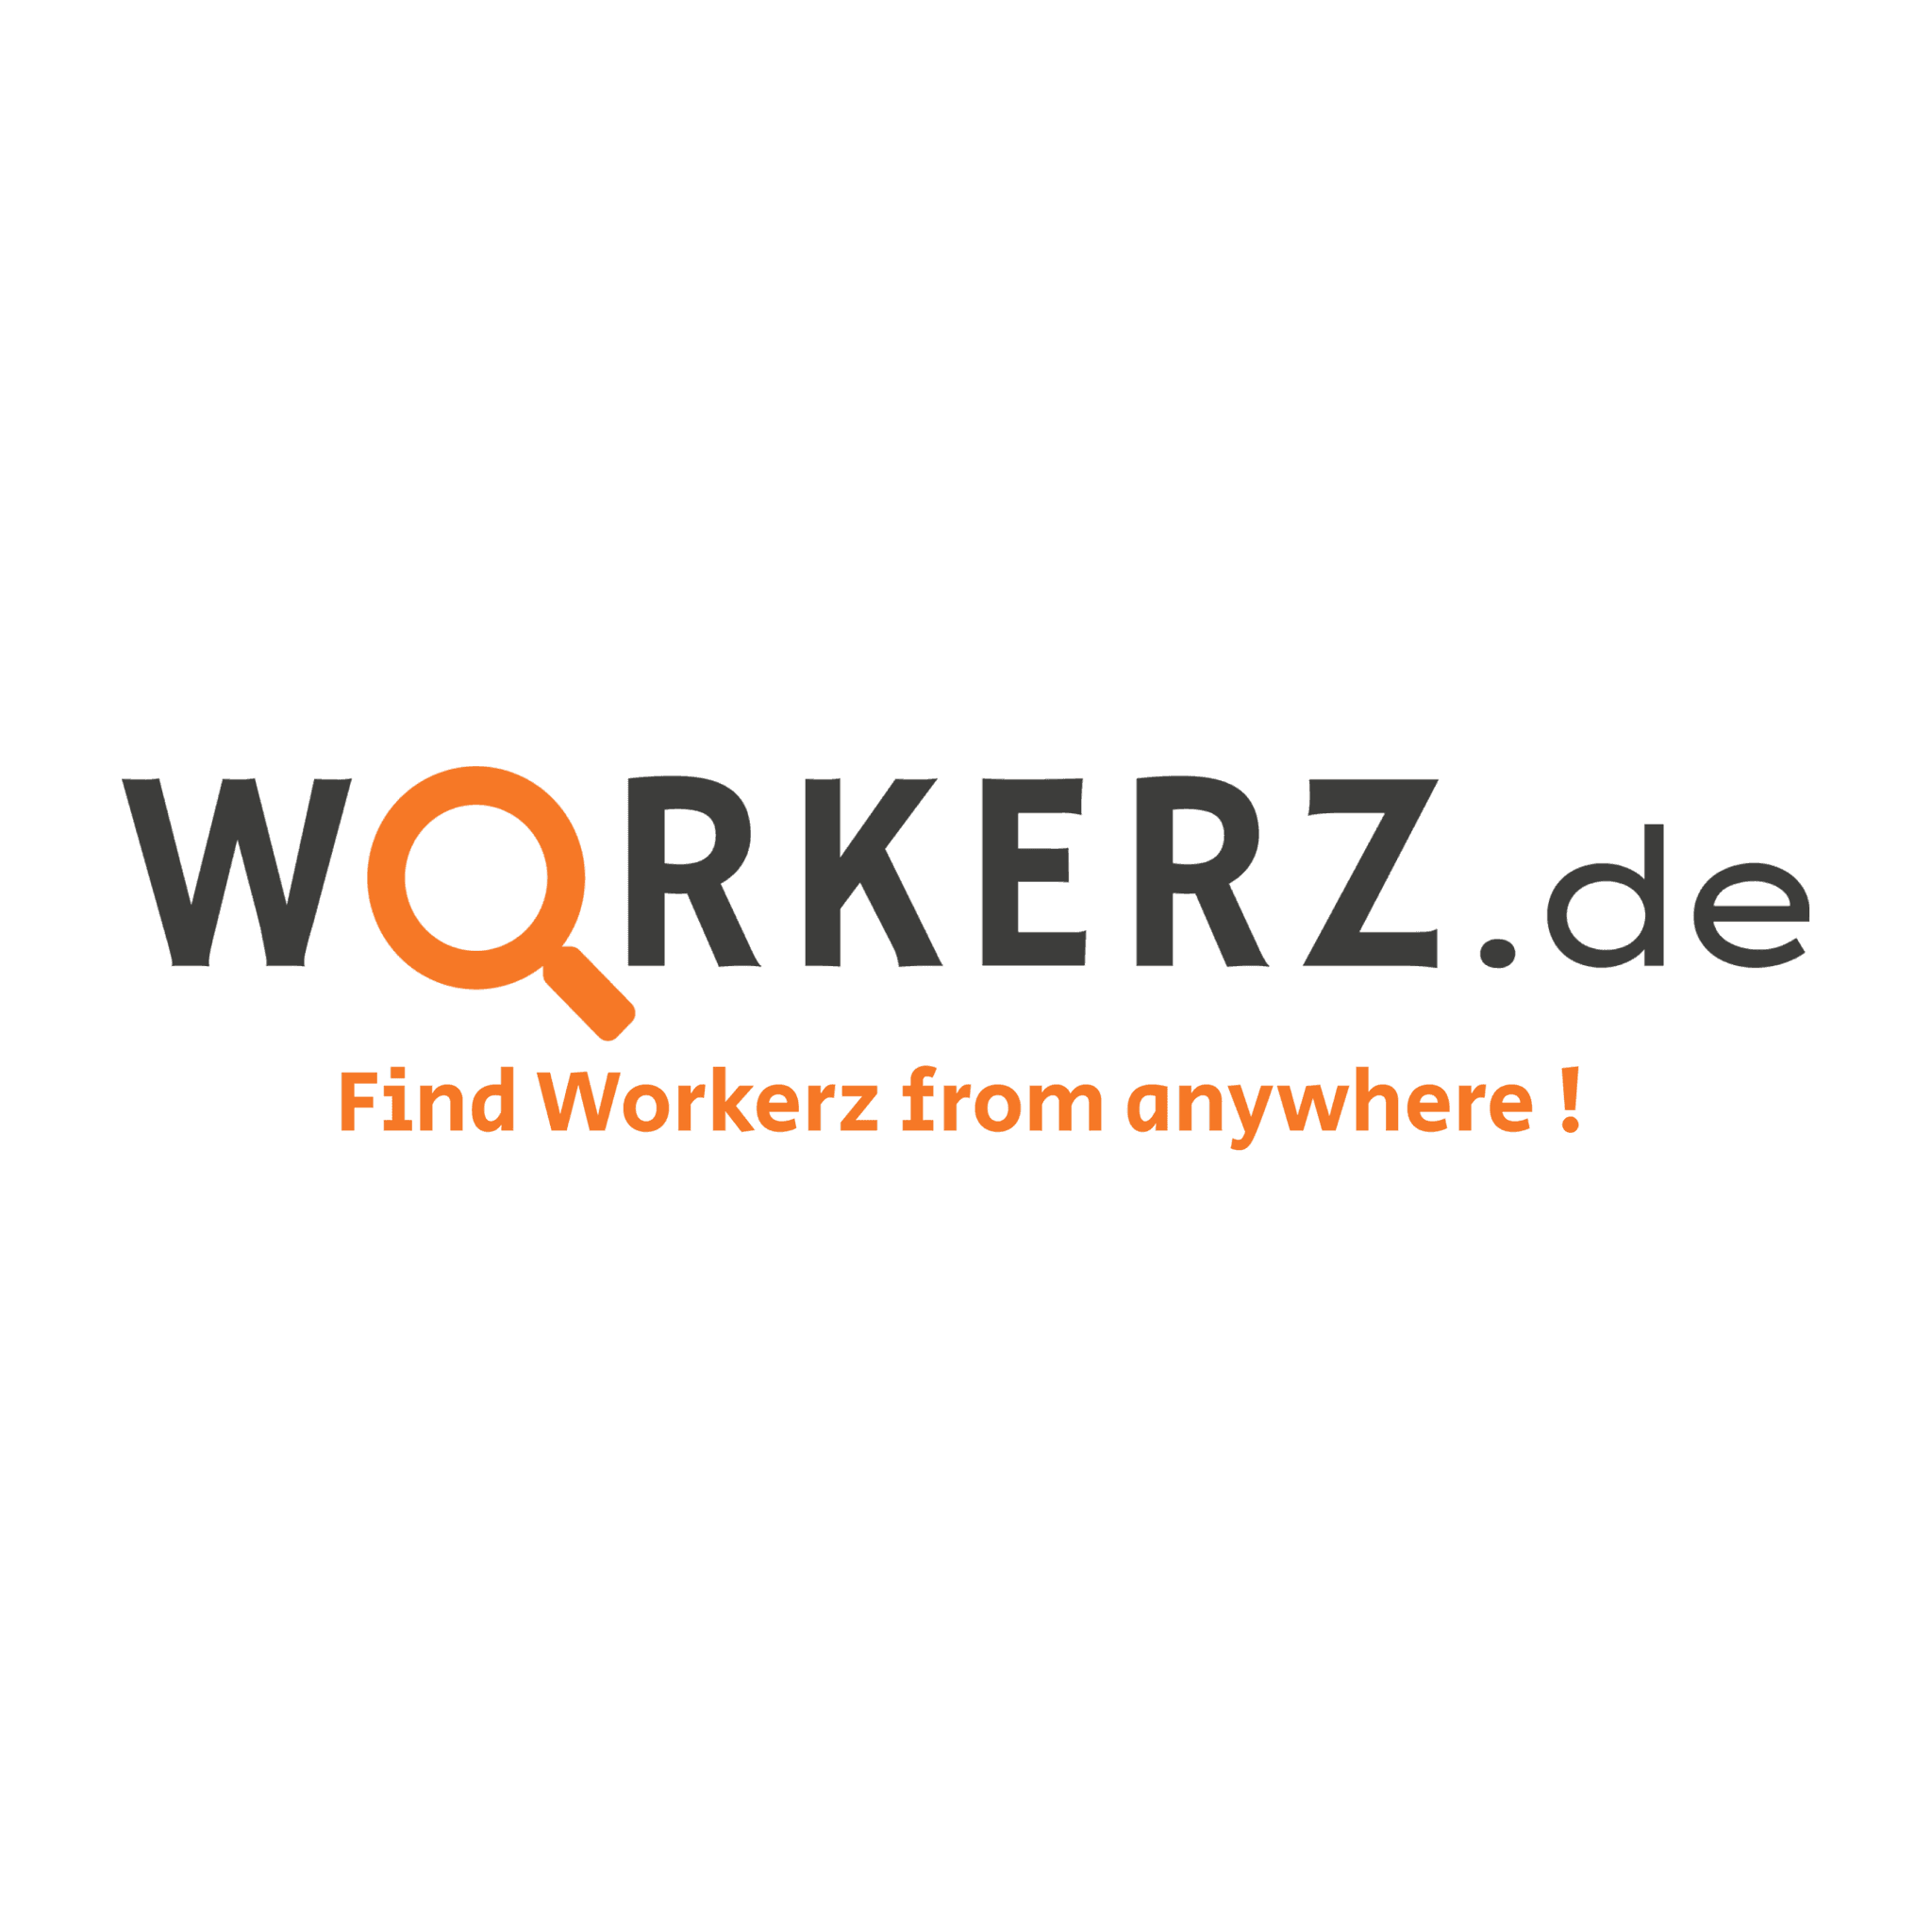 WorkerzWeb About